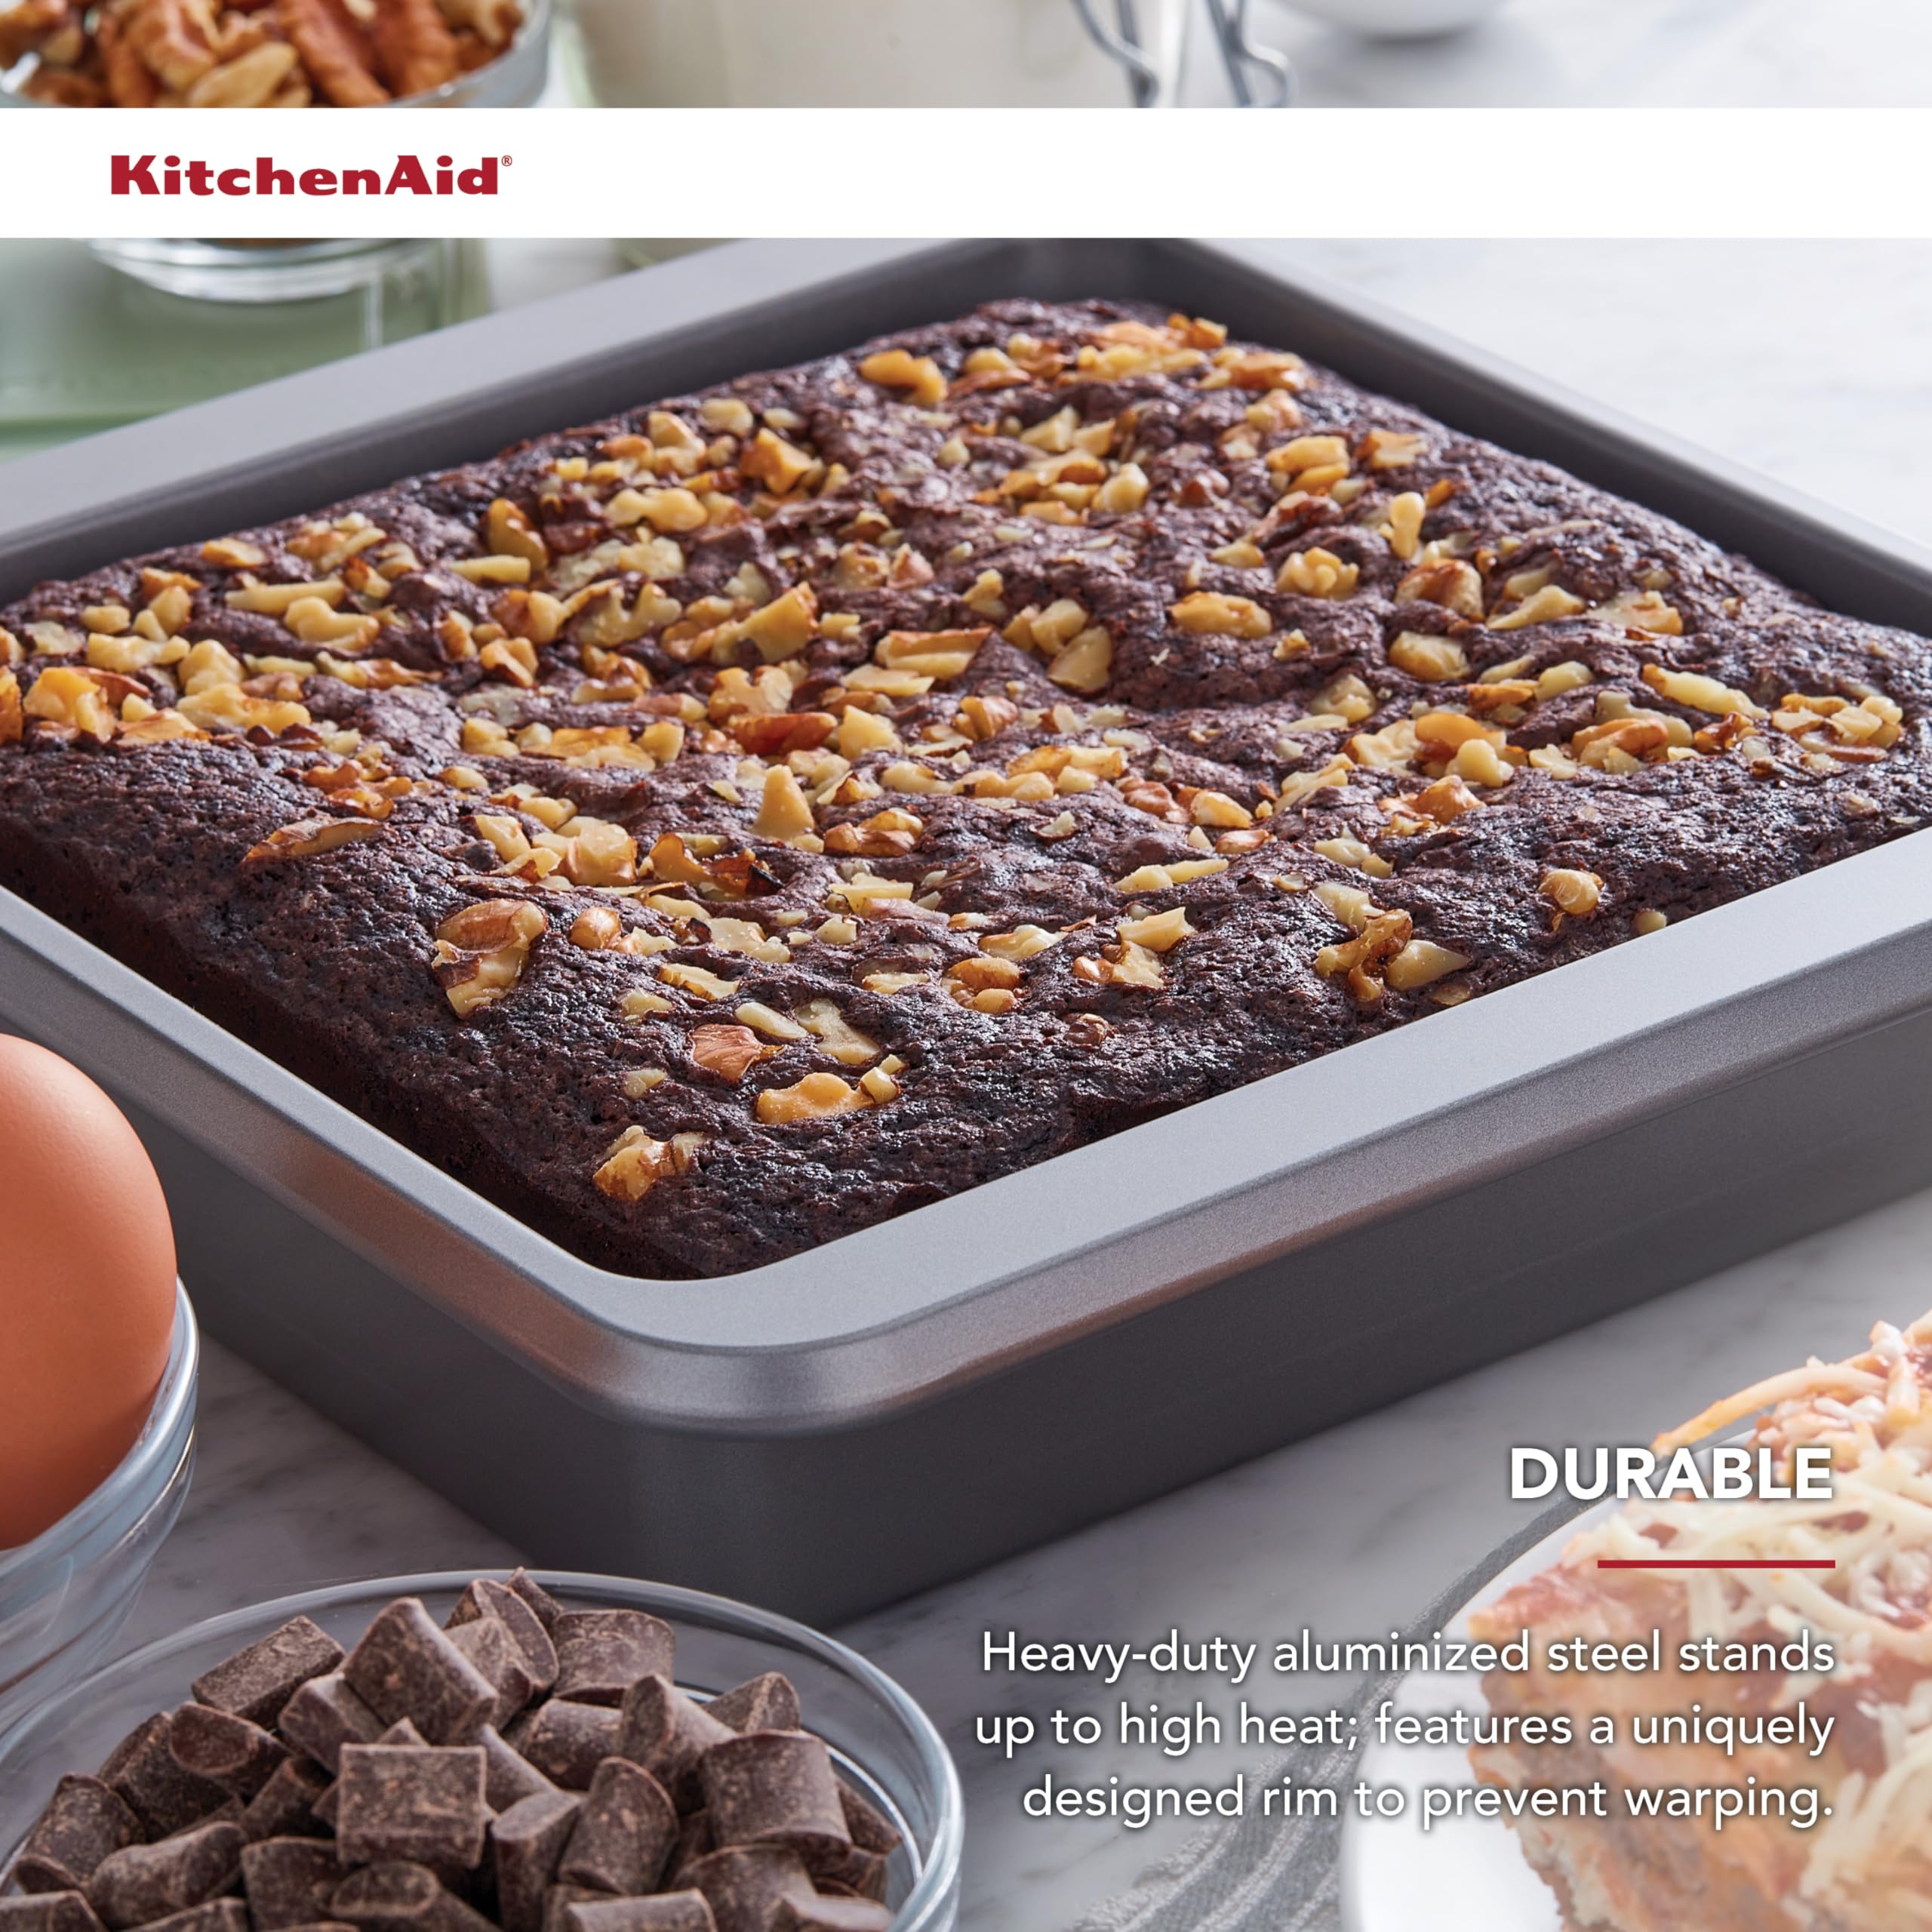 KitchenAid Nonstick 9 in Square Cake Pan with Extended Handles for Easy Grip, Aluminized Steel to Promoted Even Baking, Dishwasher Safe